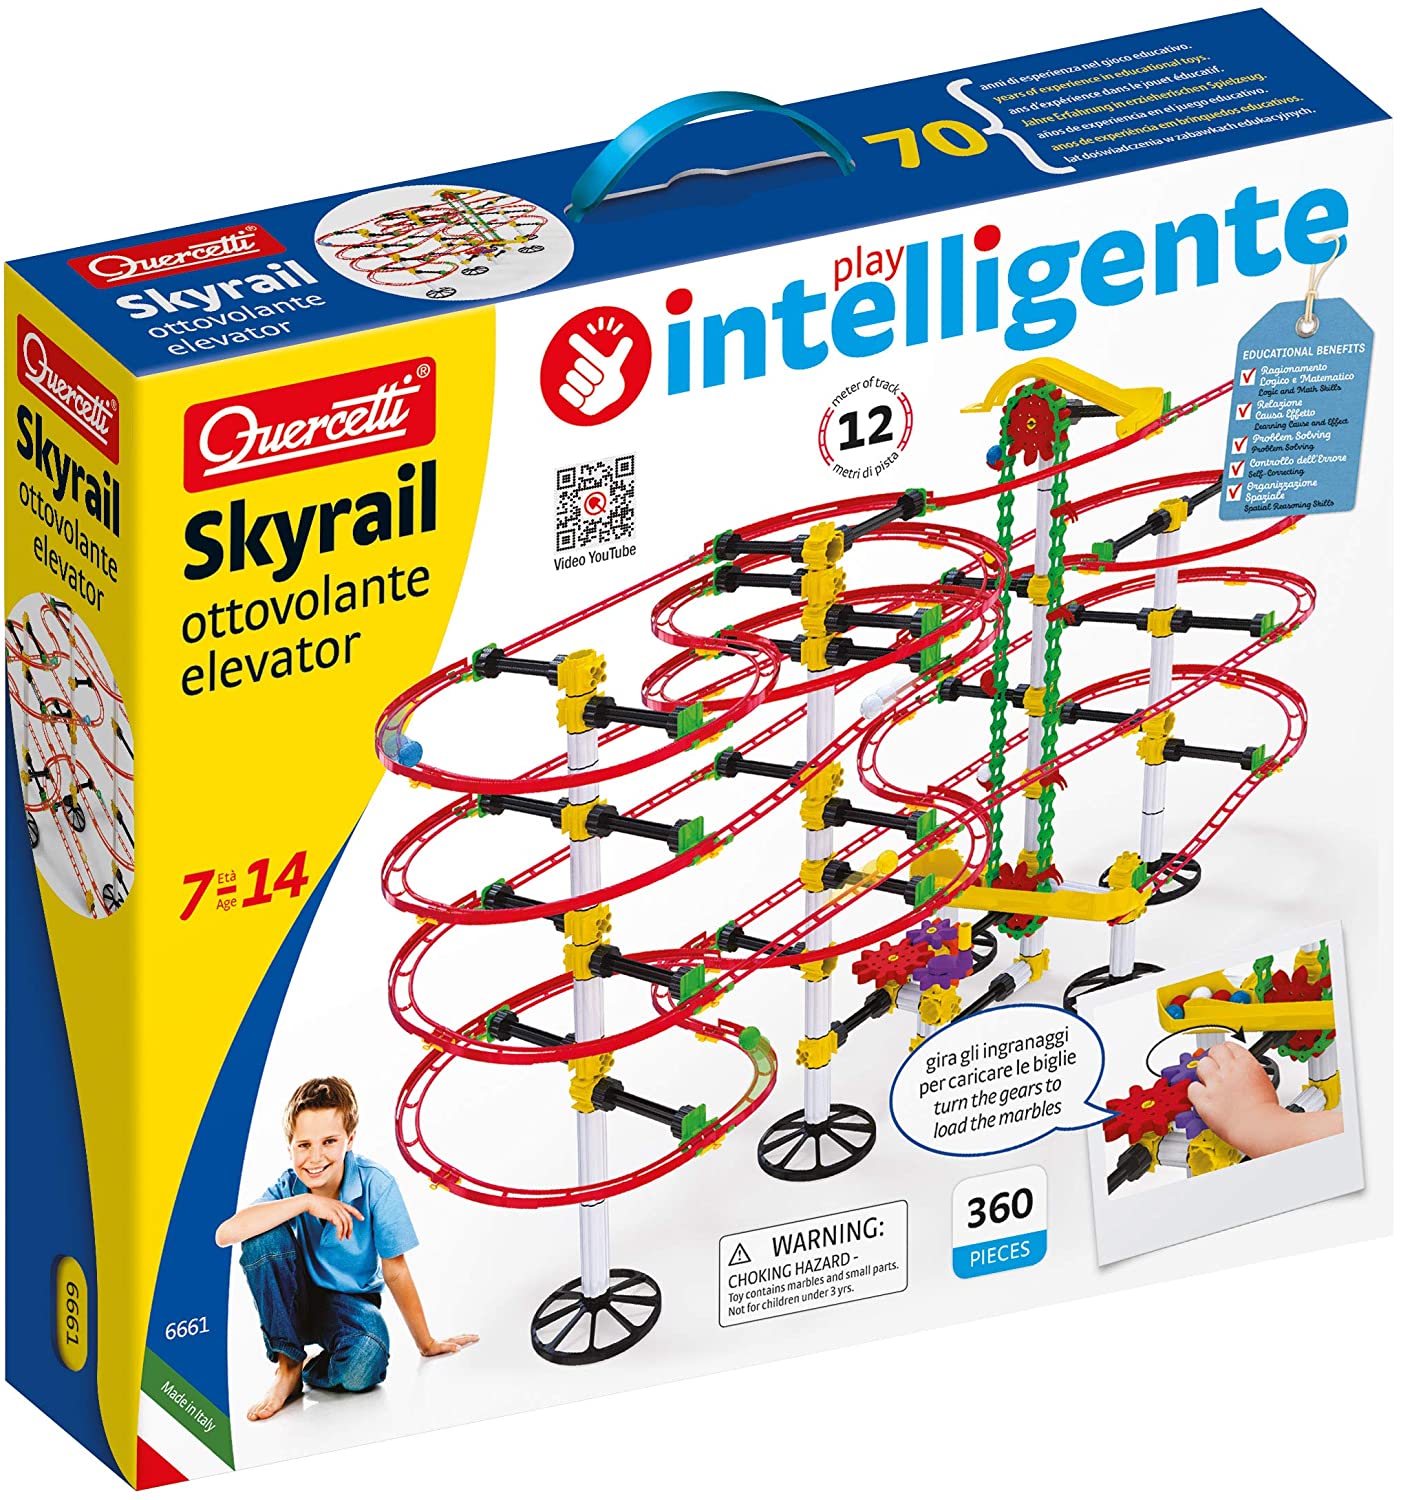 The box for a Skyrail toy with a roller coaster track on it